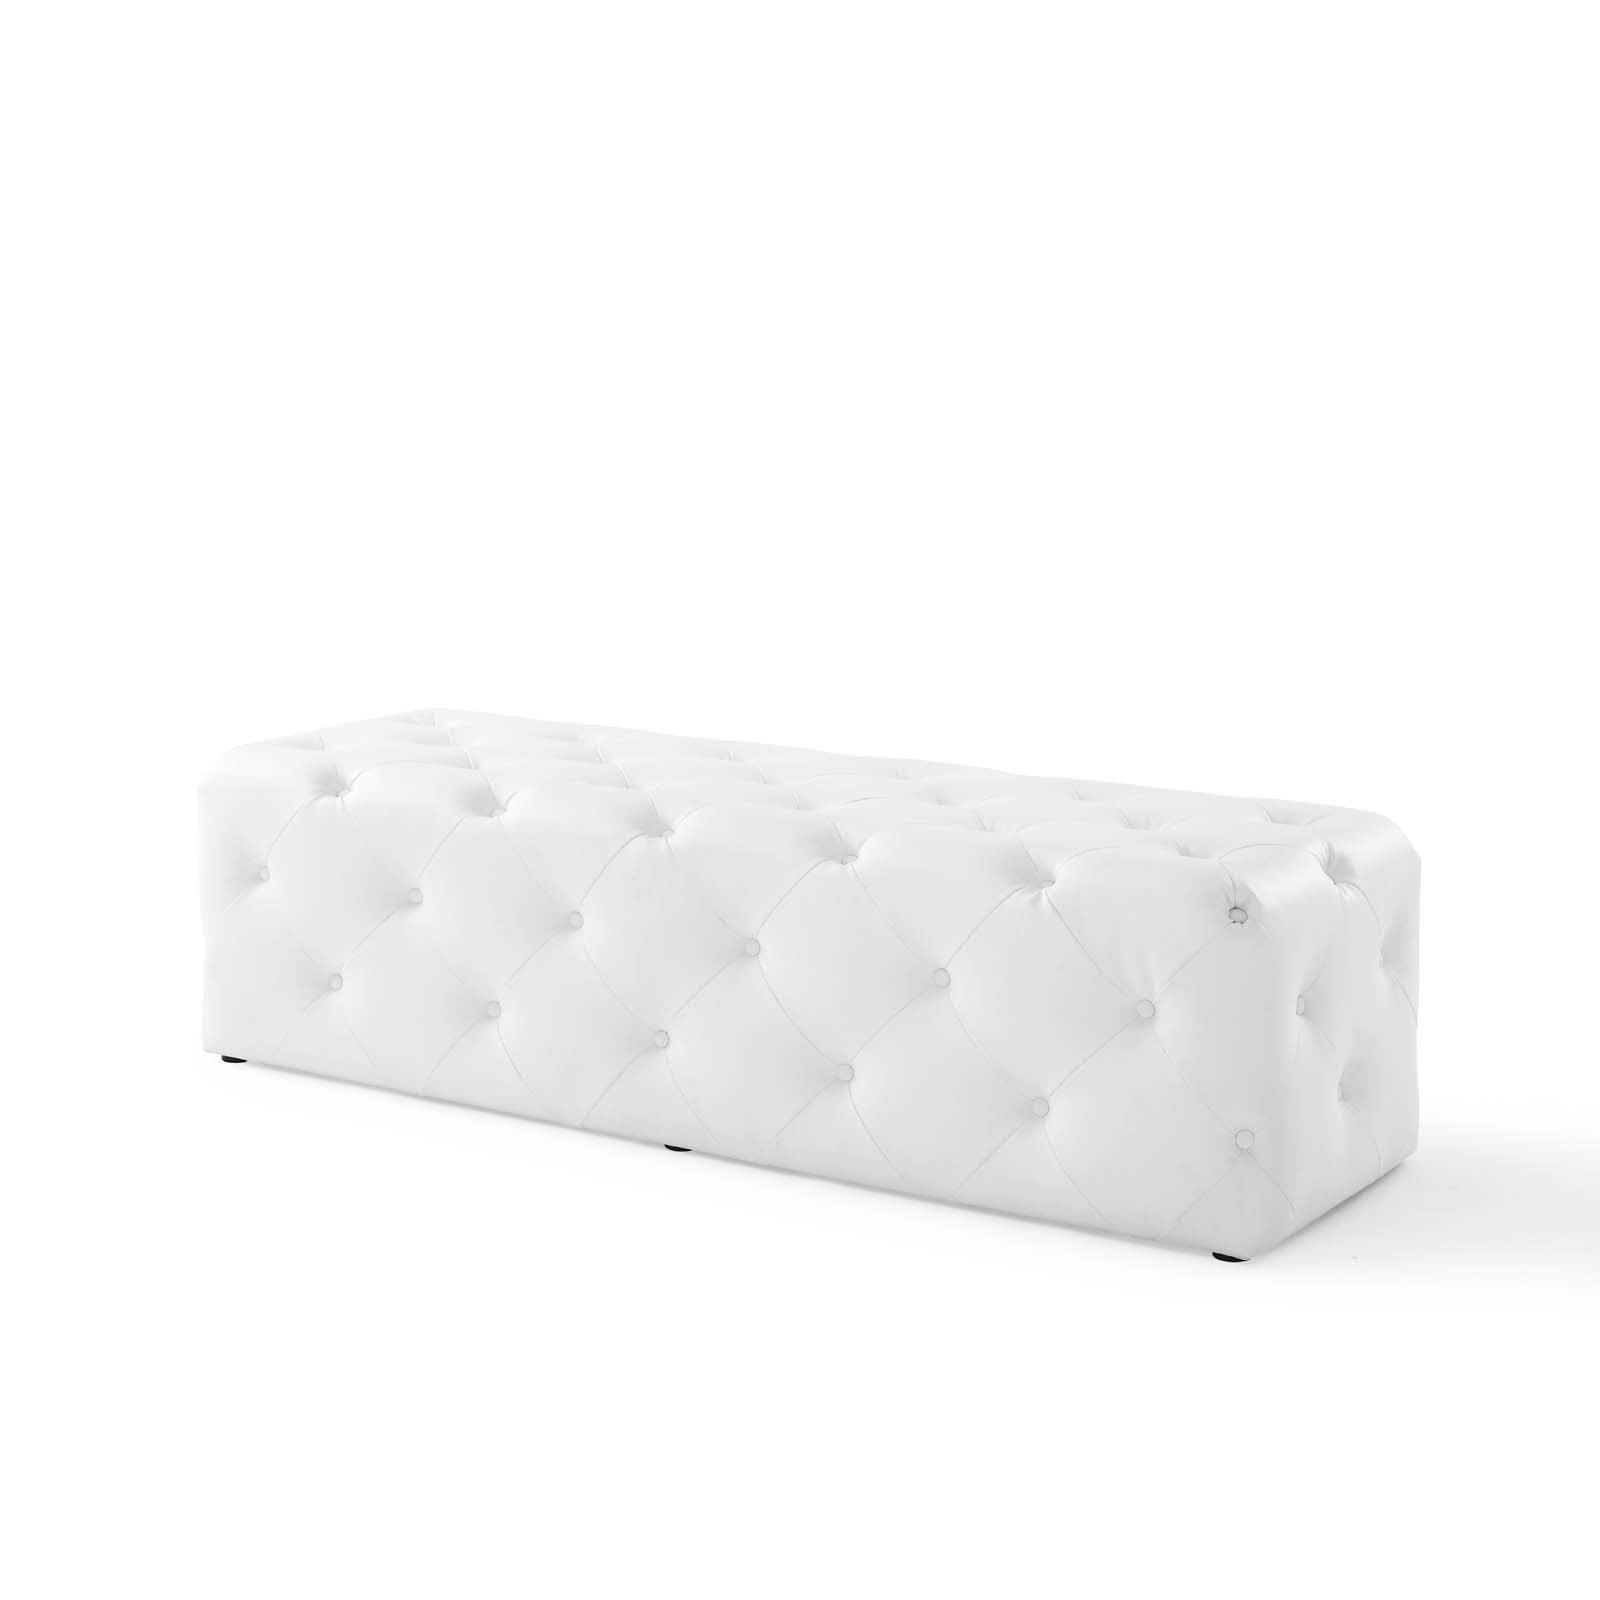 Amour 60" Tufted Button Entryway Faux Leather Bench - East Shore Modern Home Furnishings